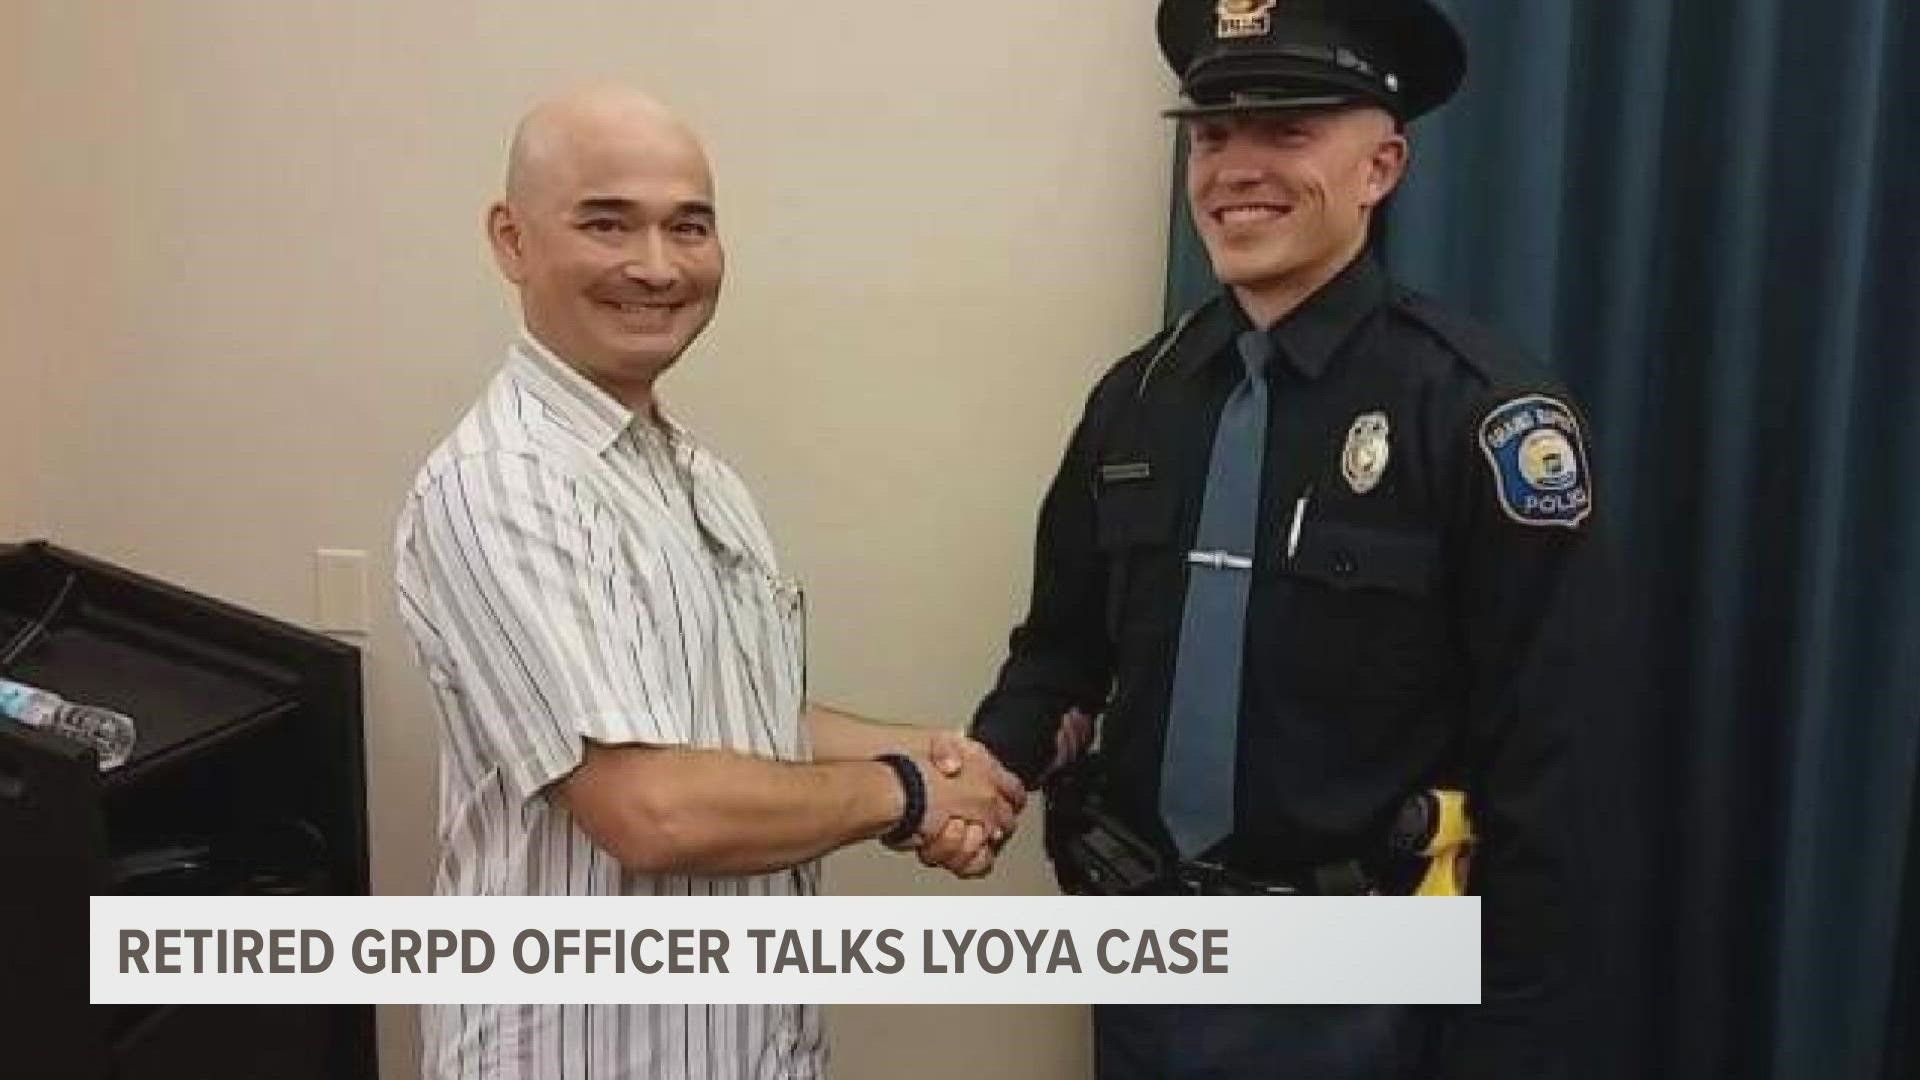 13 ON YOUR SIDE received the officer personnel record, which shows several instances of awards and praise throughout his career with the Grand Rapids Police Dept.